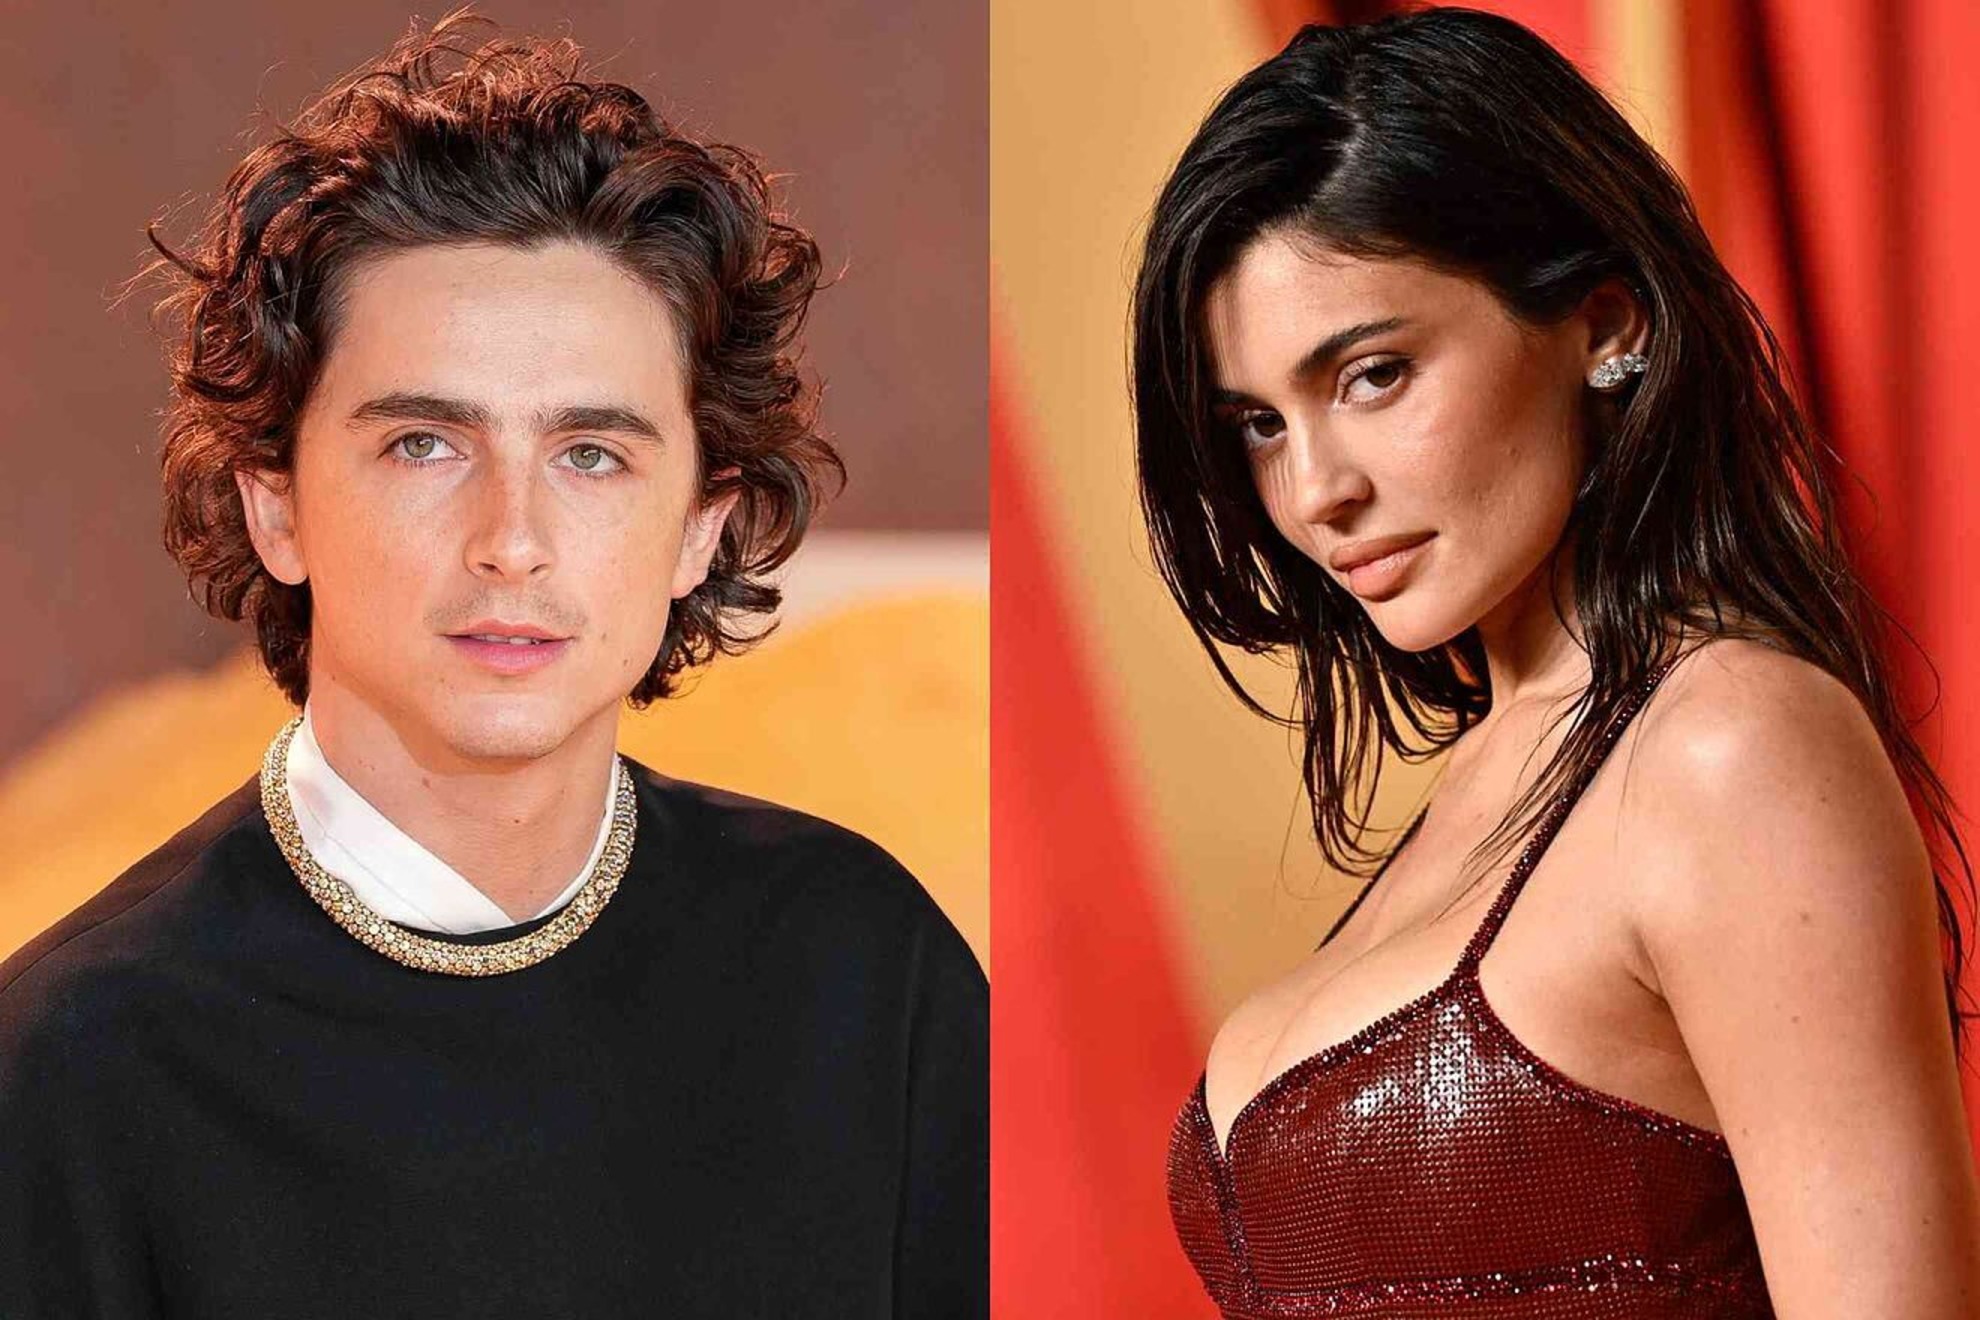 Timothee Chalamet and Kylie Jenner.